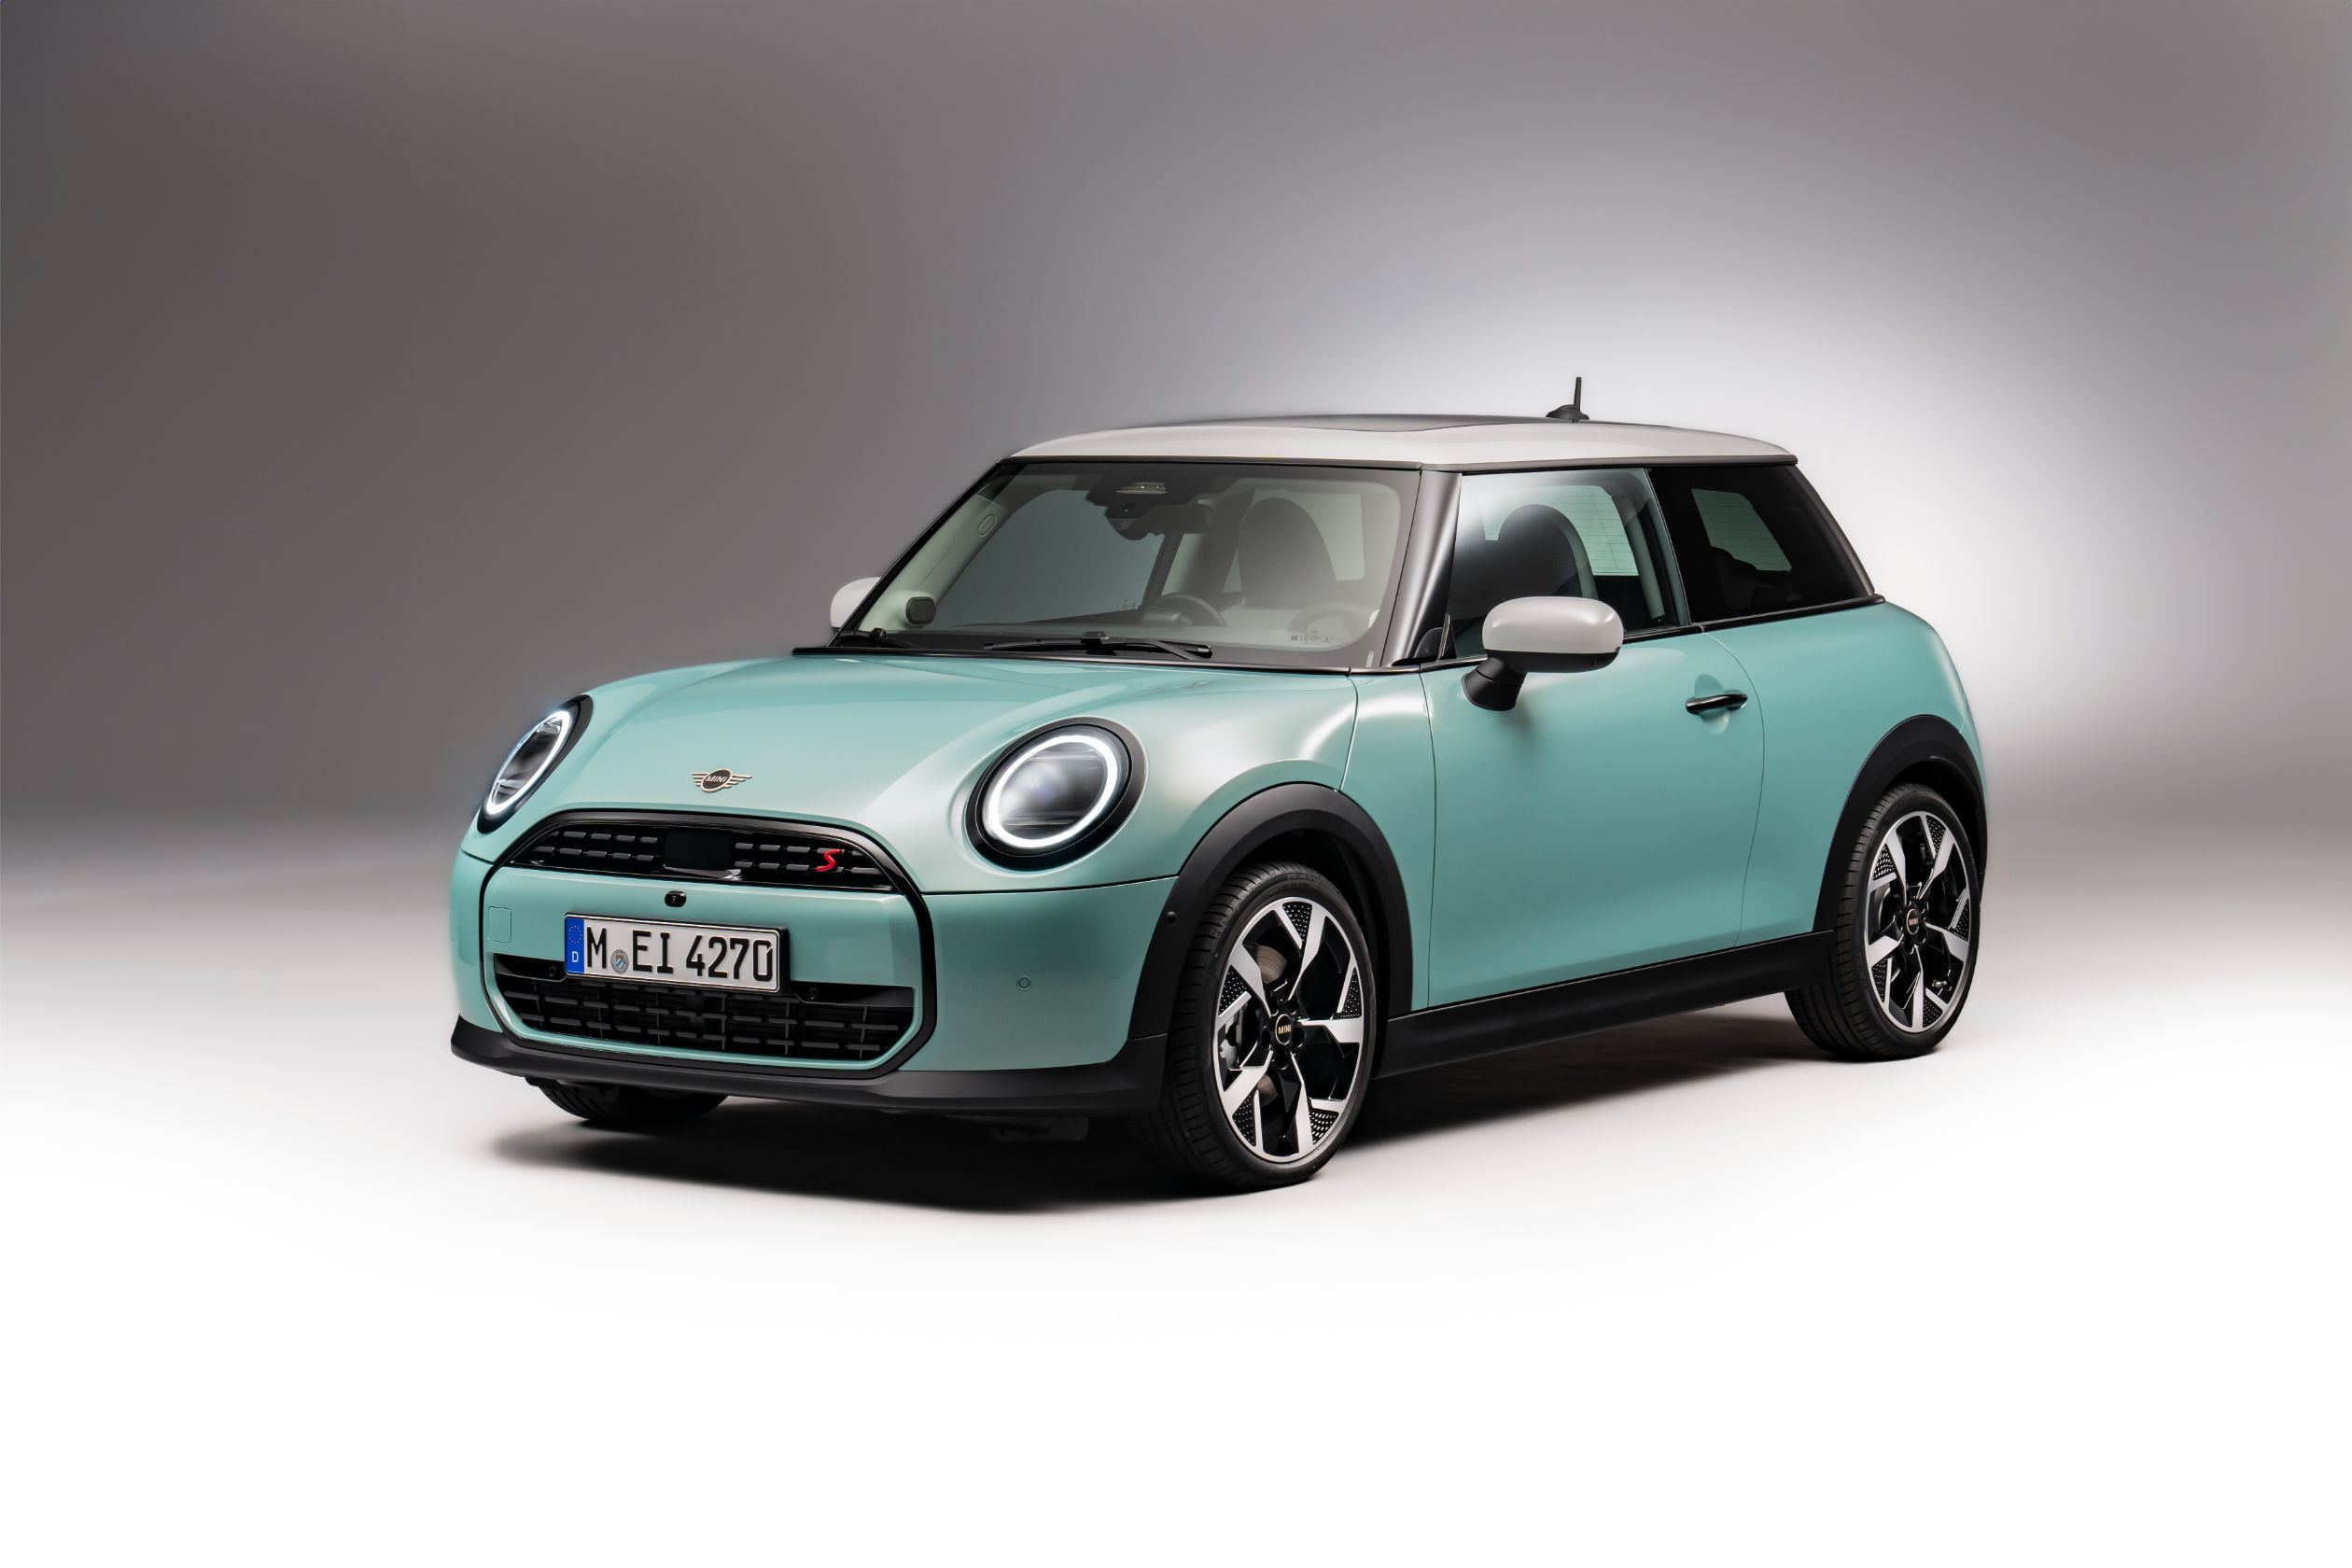 Gasoline Engines Aren't Going Away for Mini Brand Just Yet